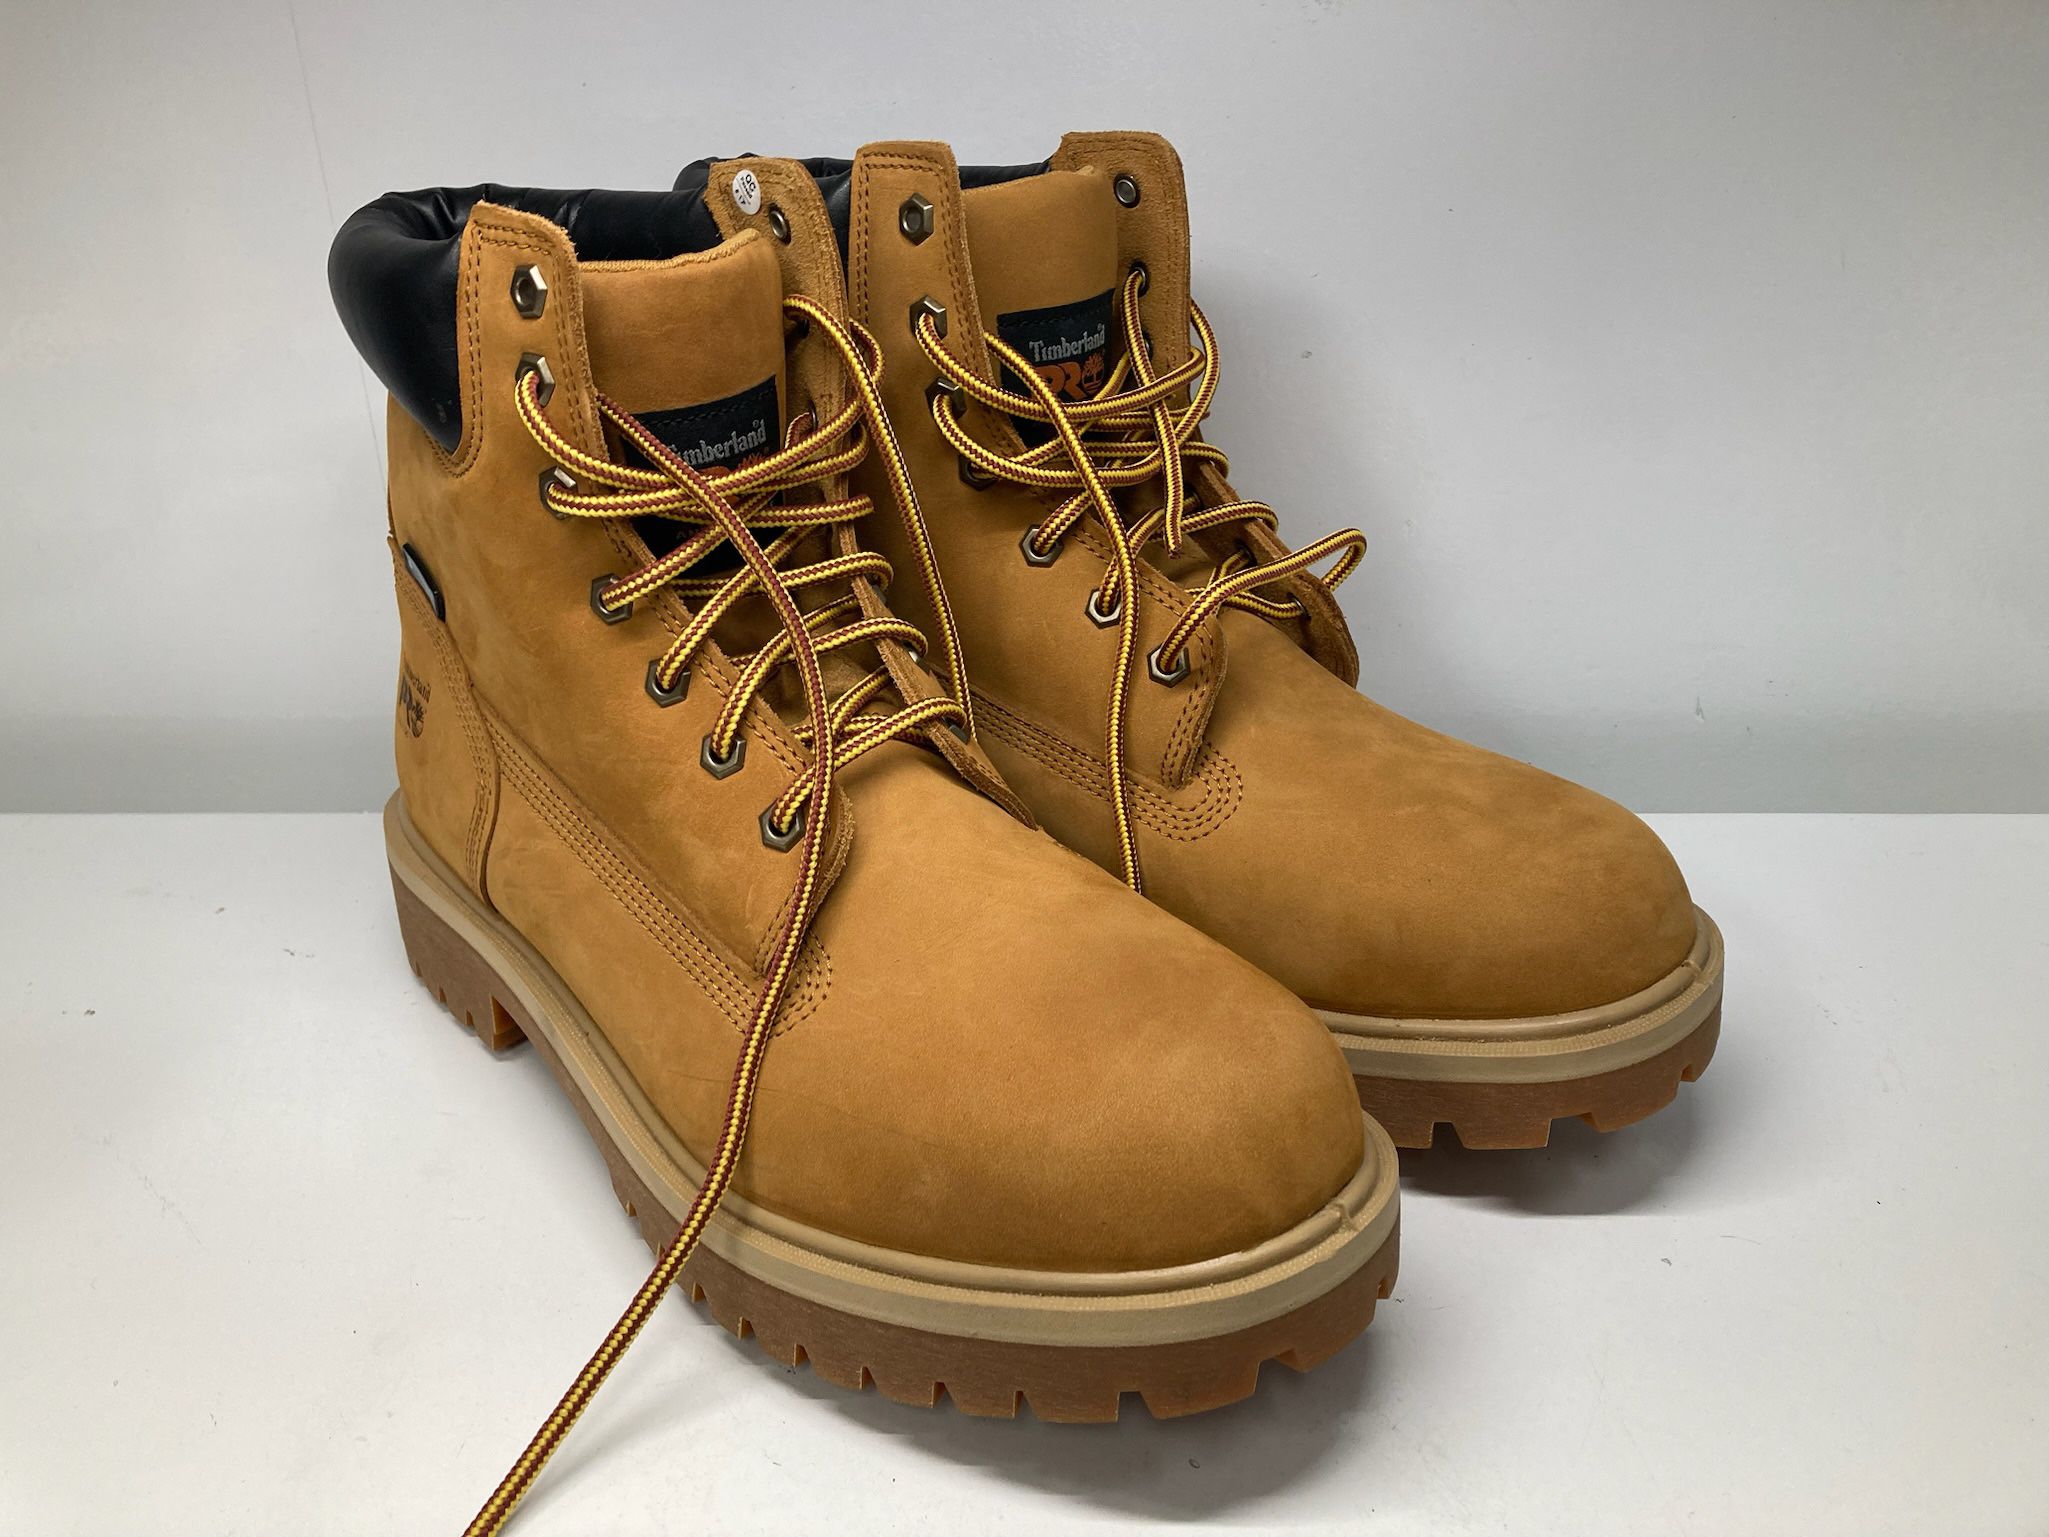 TIMBERLAND PRO Boots: Men's Waterproof Insulated 65030 6” Work Boots